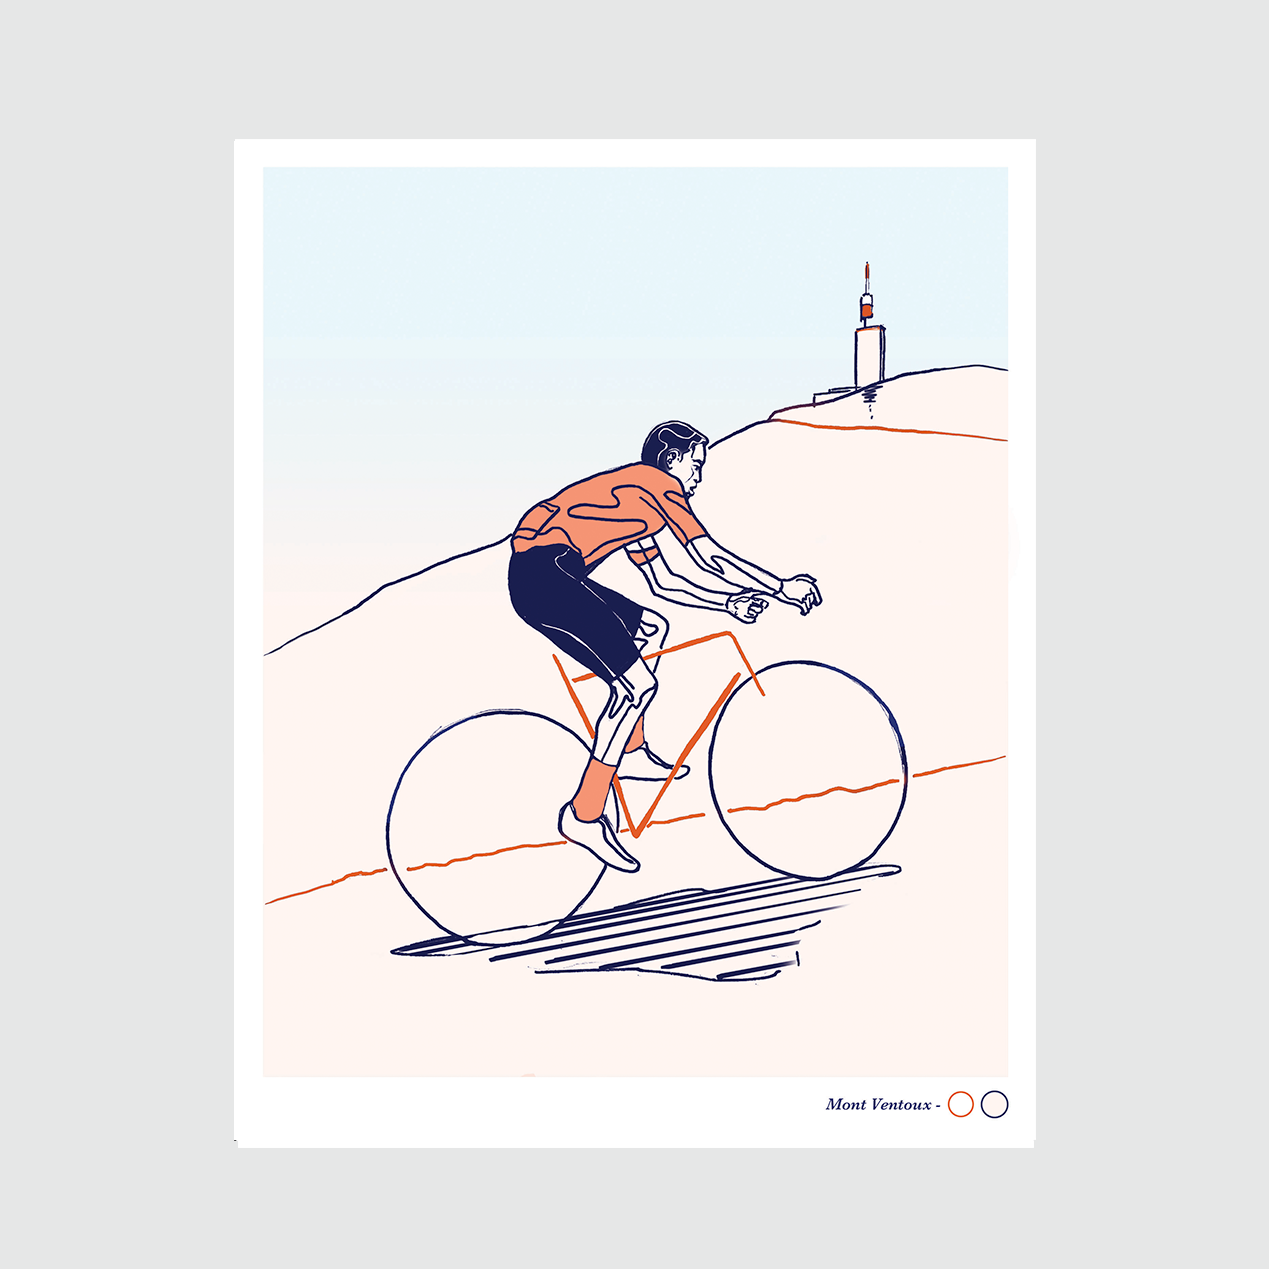 Mont Ventoux Print by Ovso